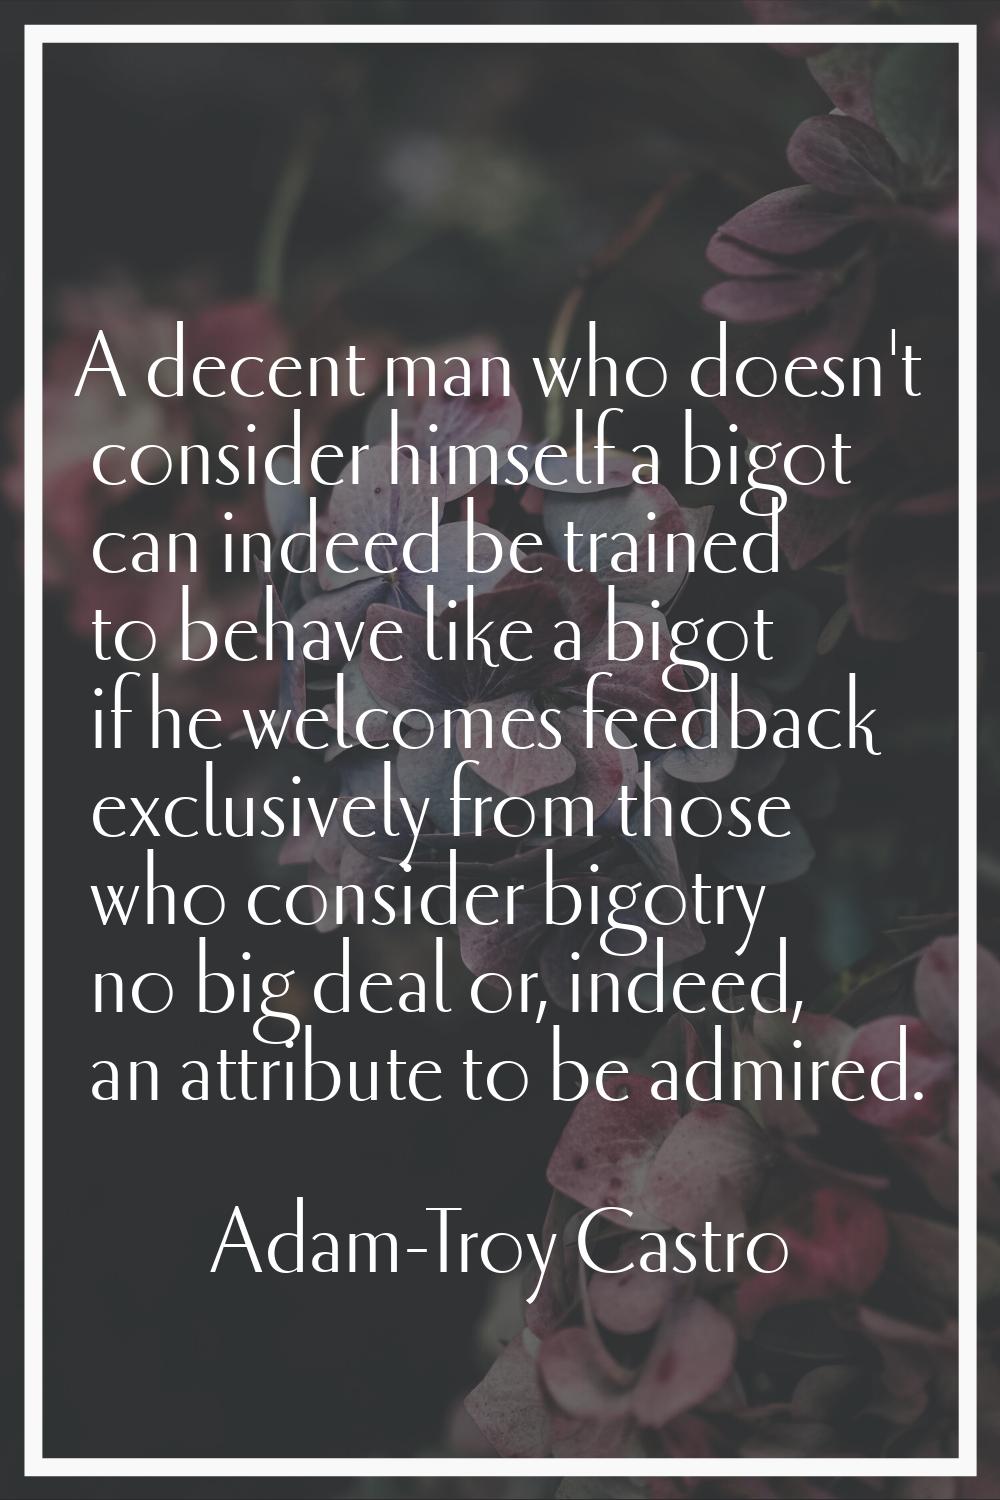 A decent man who doesn't consider himself a bigot can indeed be trained to behave like a bigot if h